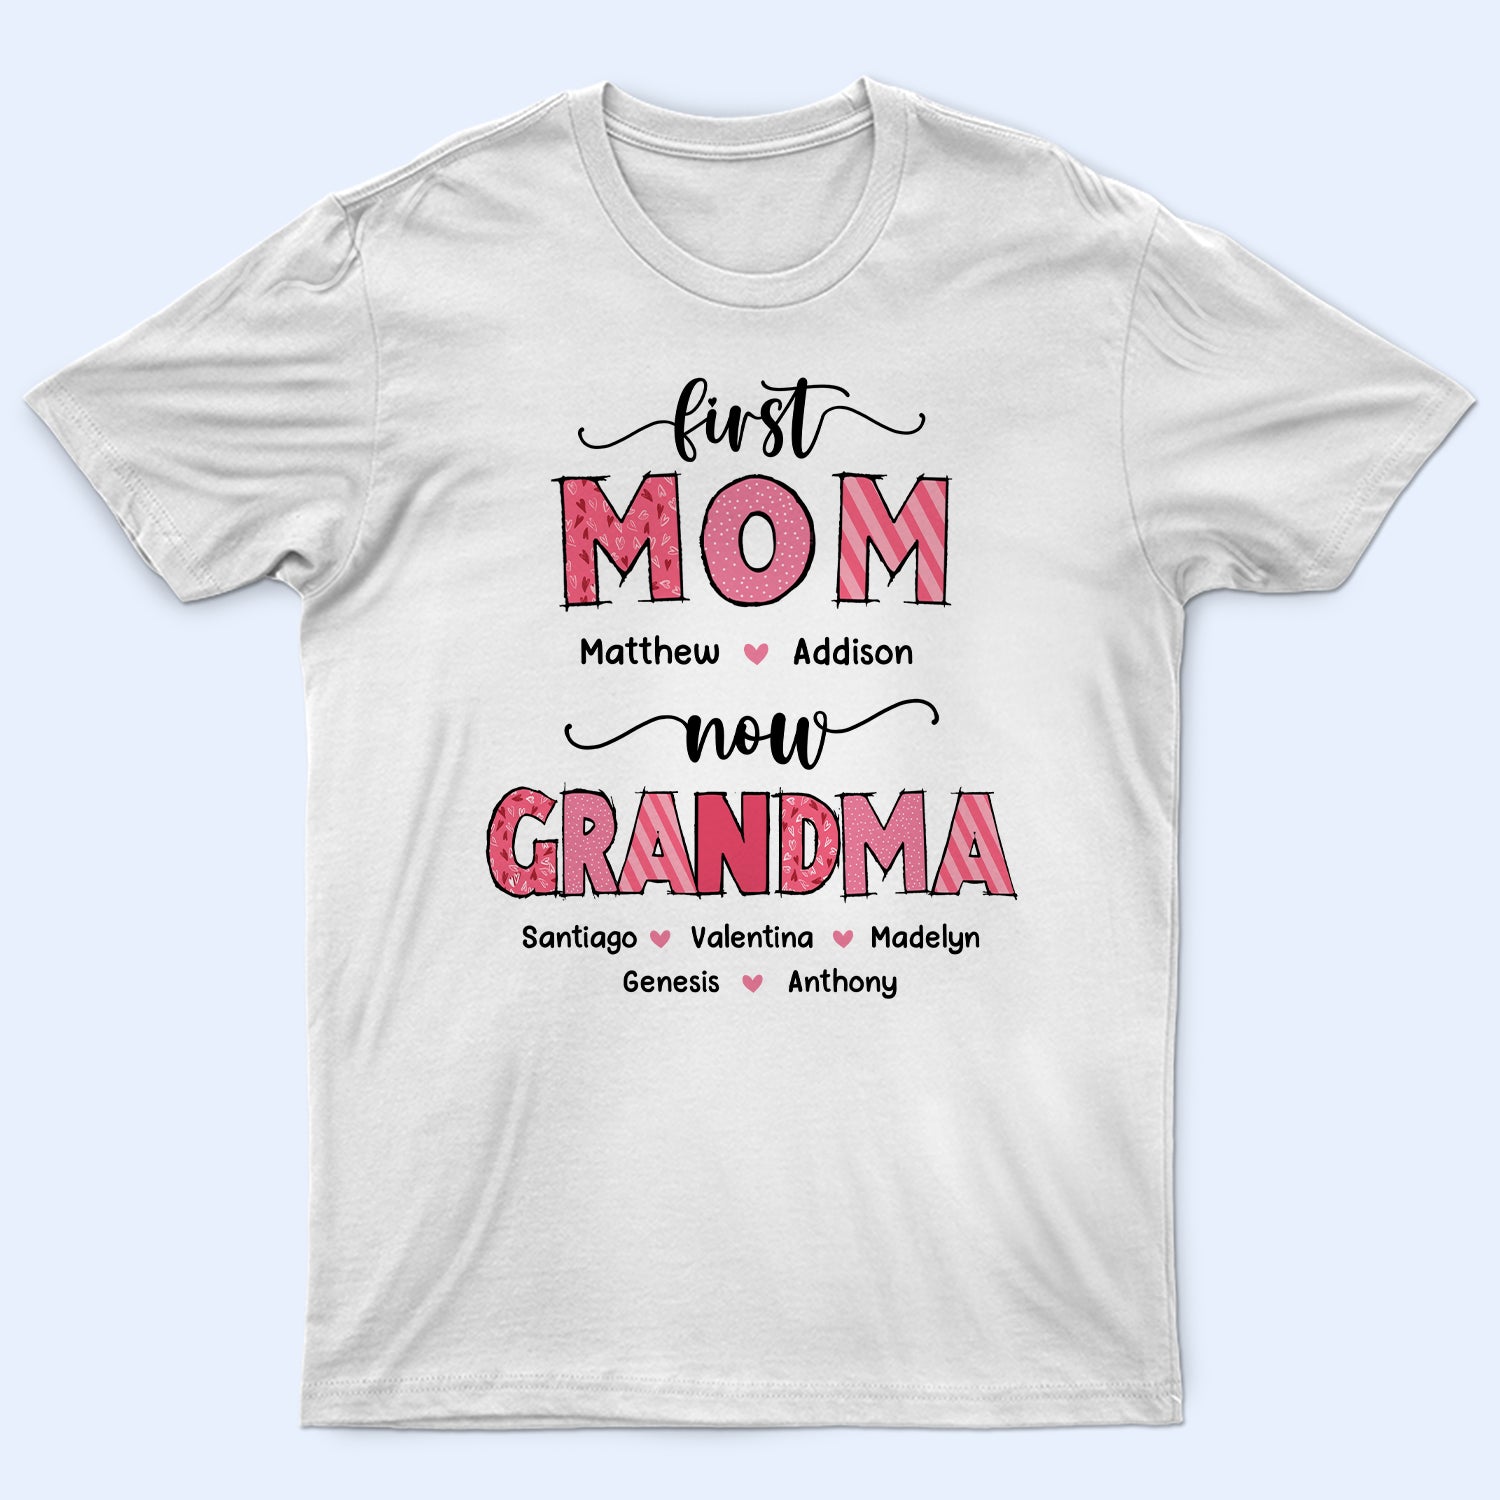 First Mom Now Grandma - Gift For Mother, Grandmother - Personalized T Shirt